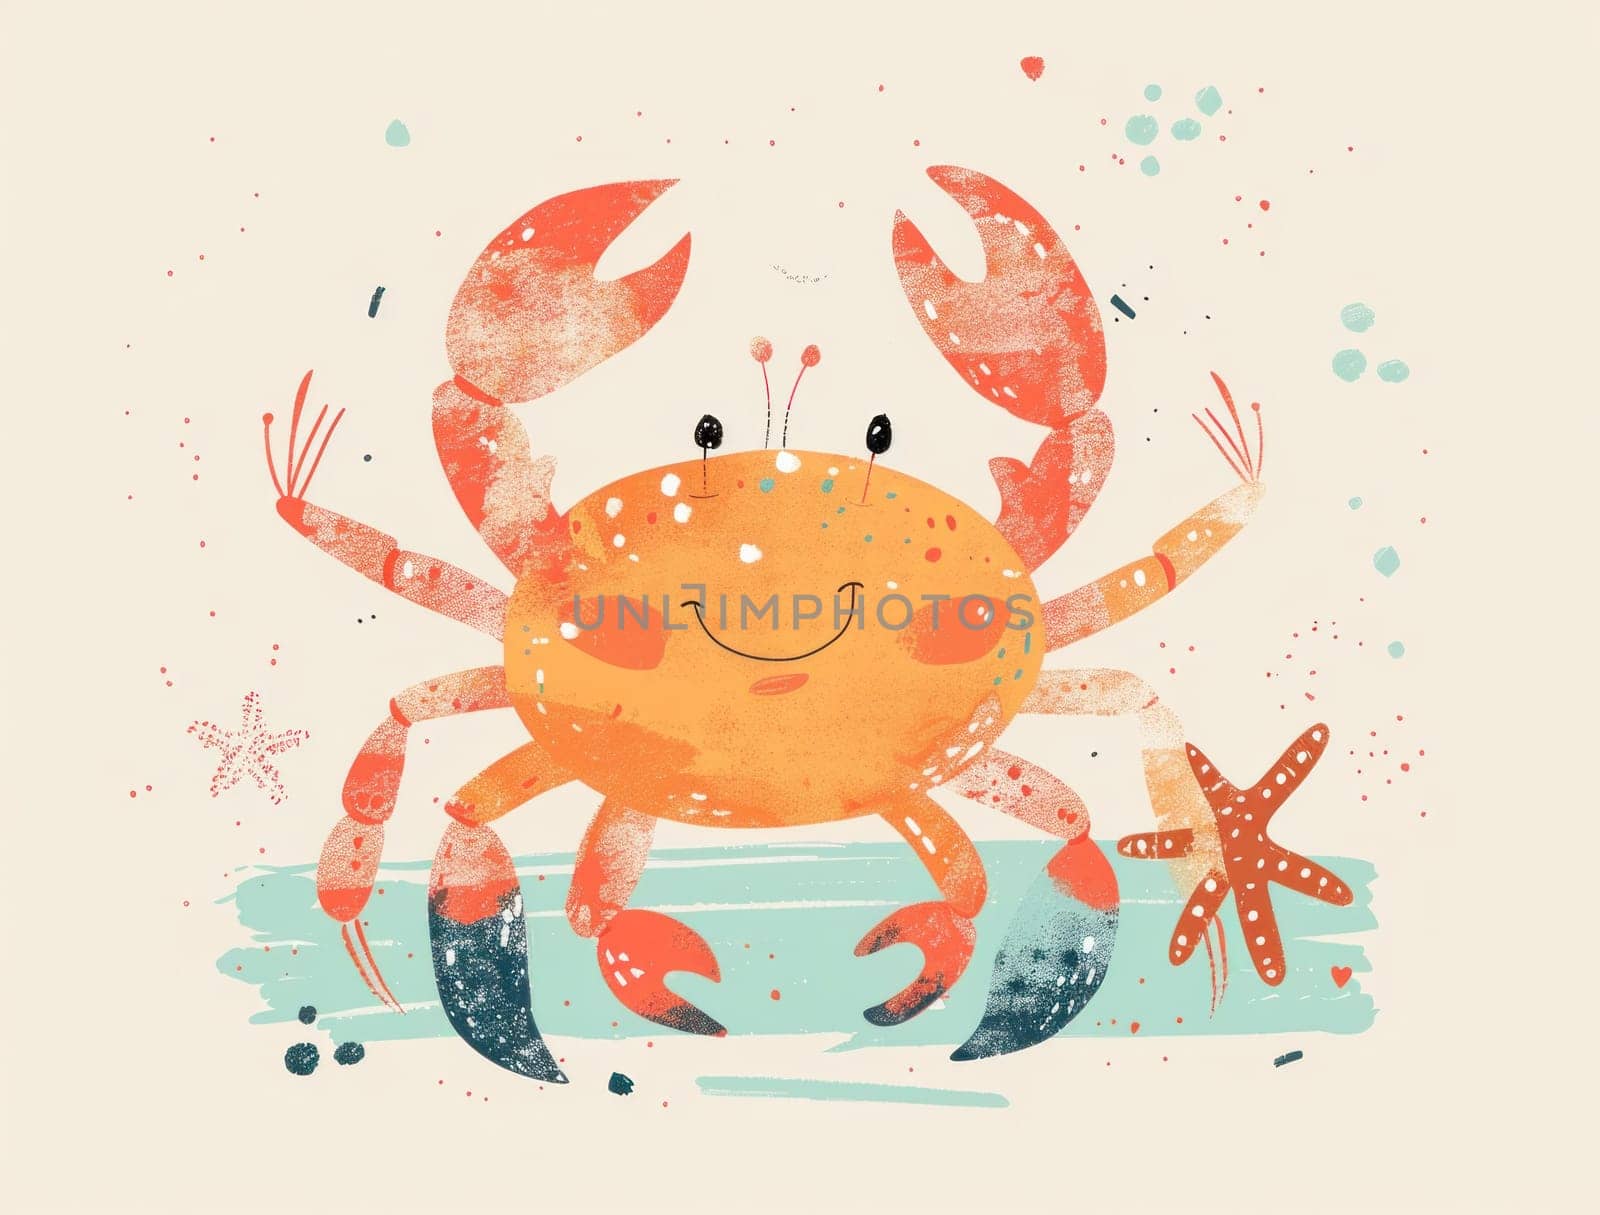 Underwater adventure majestic crab and starfish in the water on a beige background